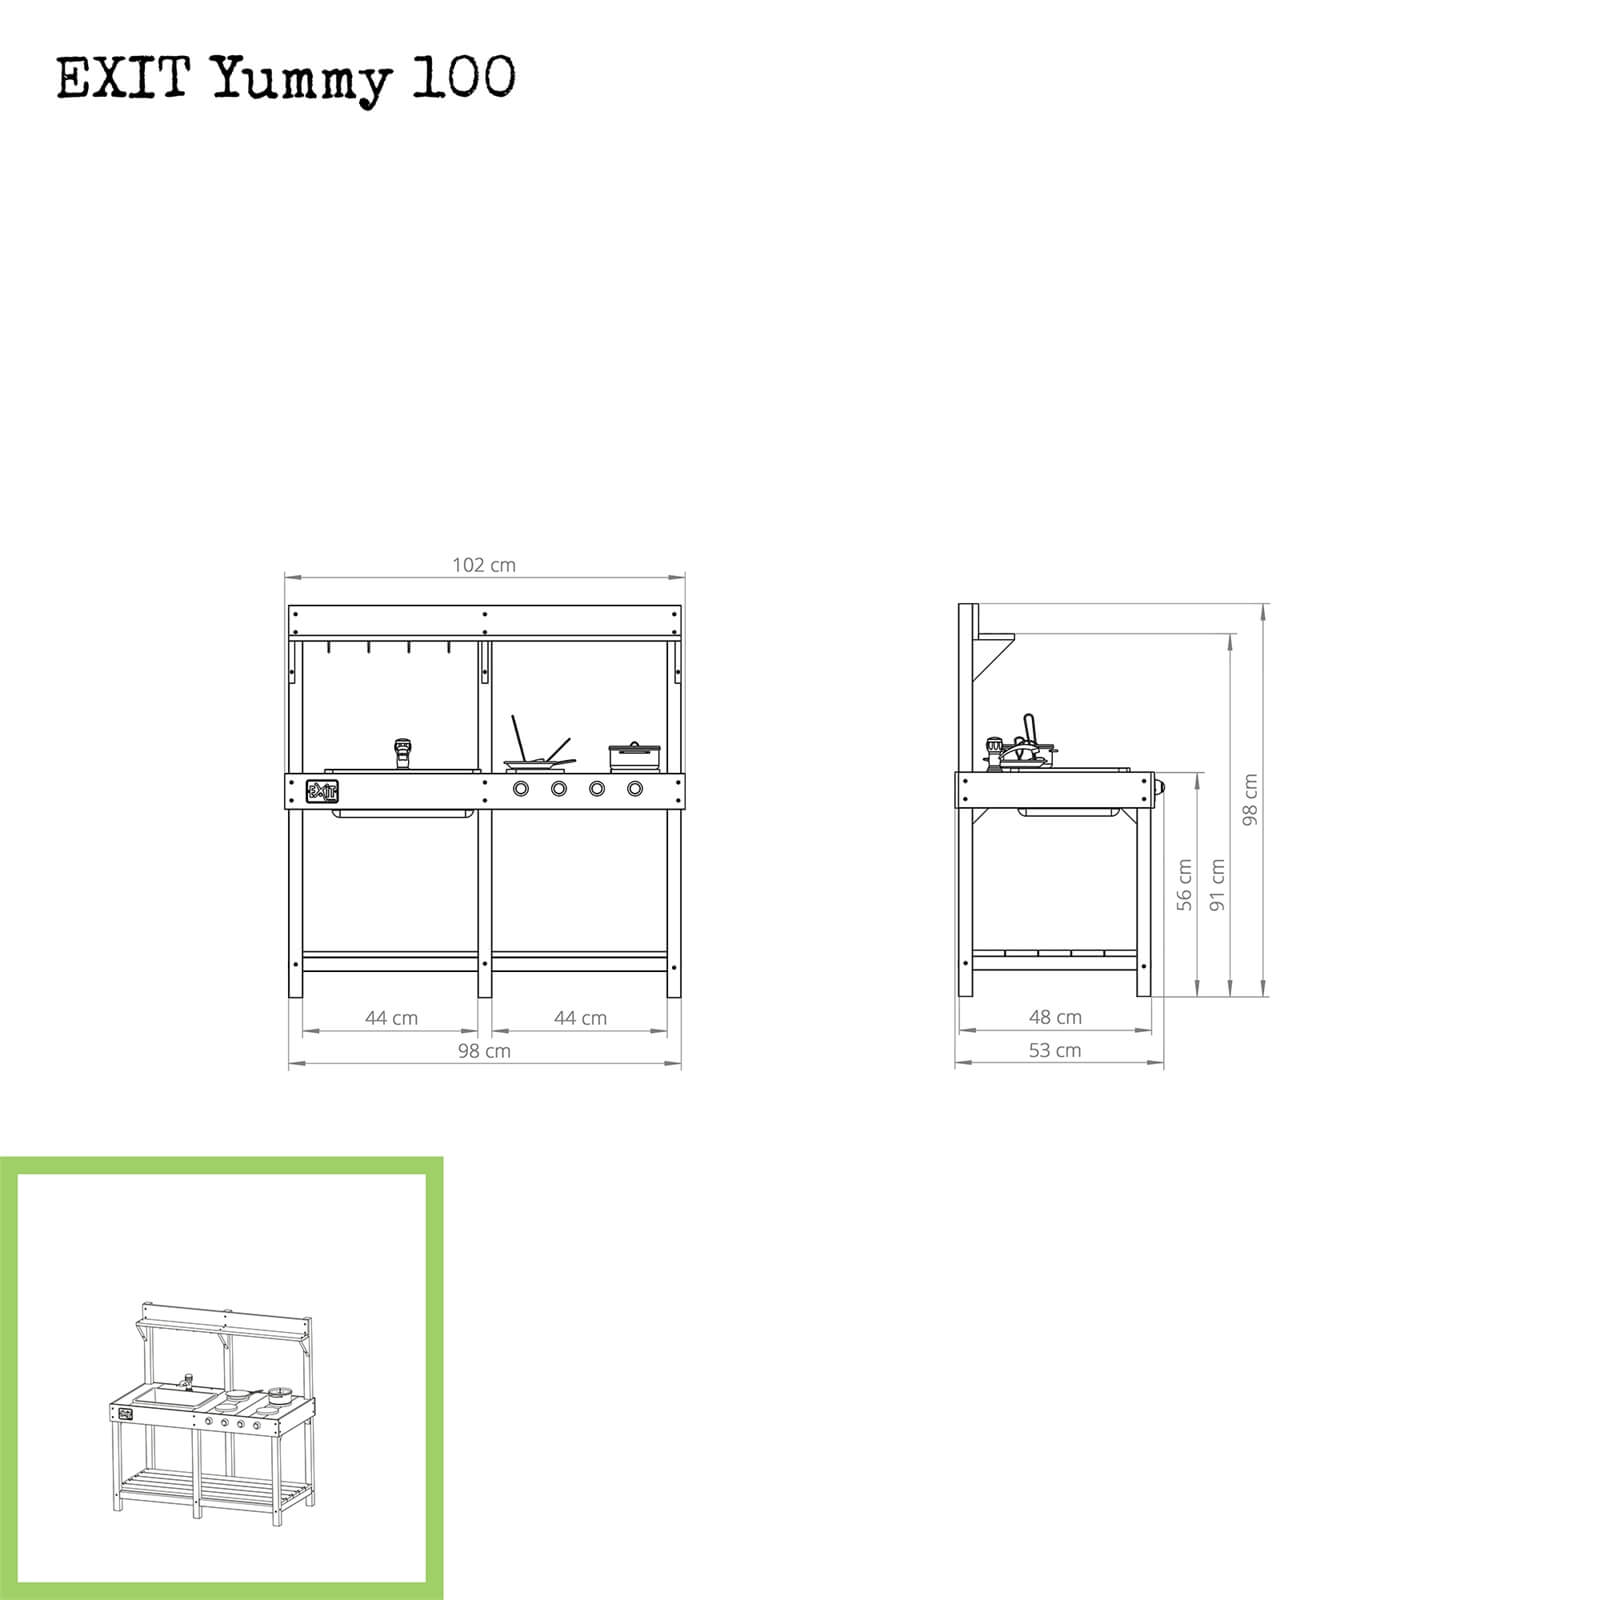 Exit Yummy Outdoor Play Kitchen 100